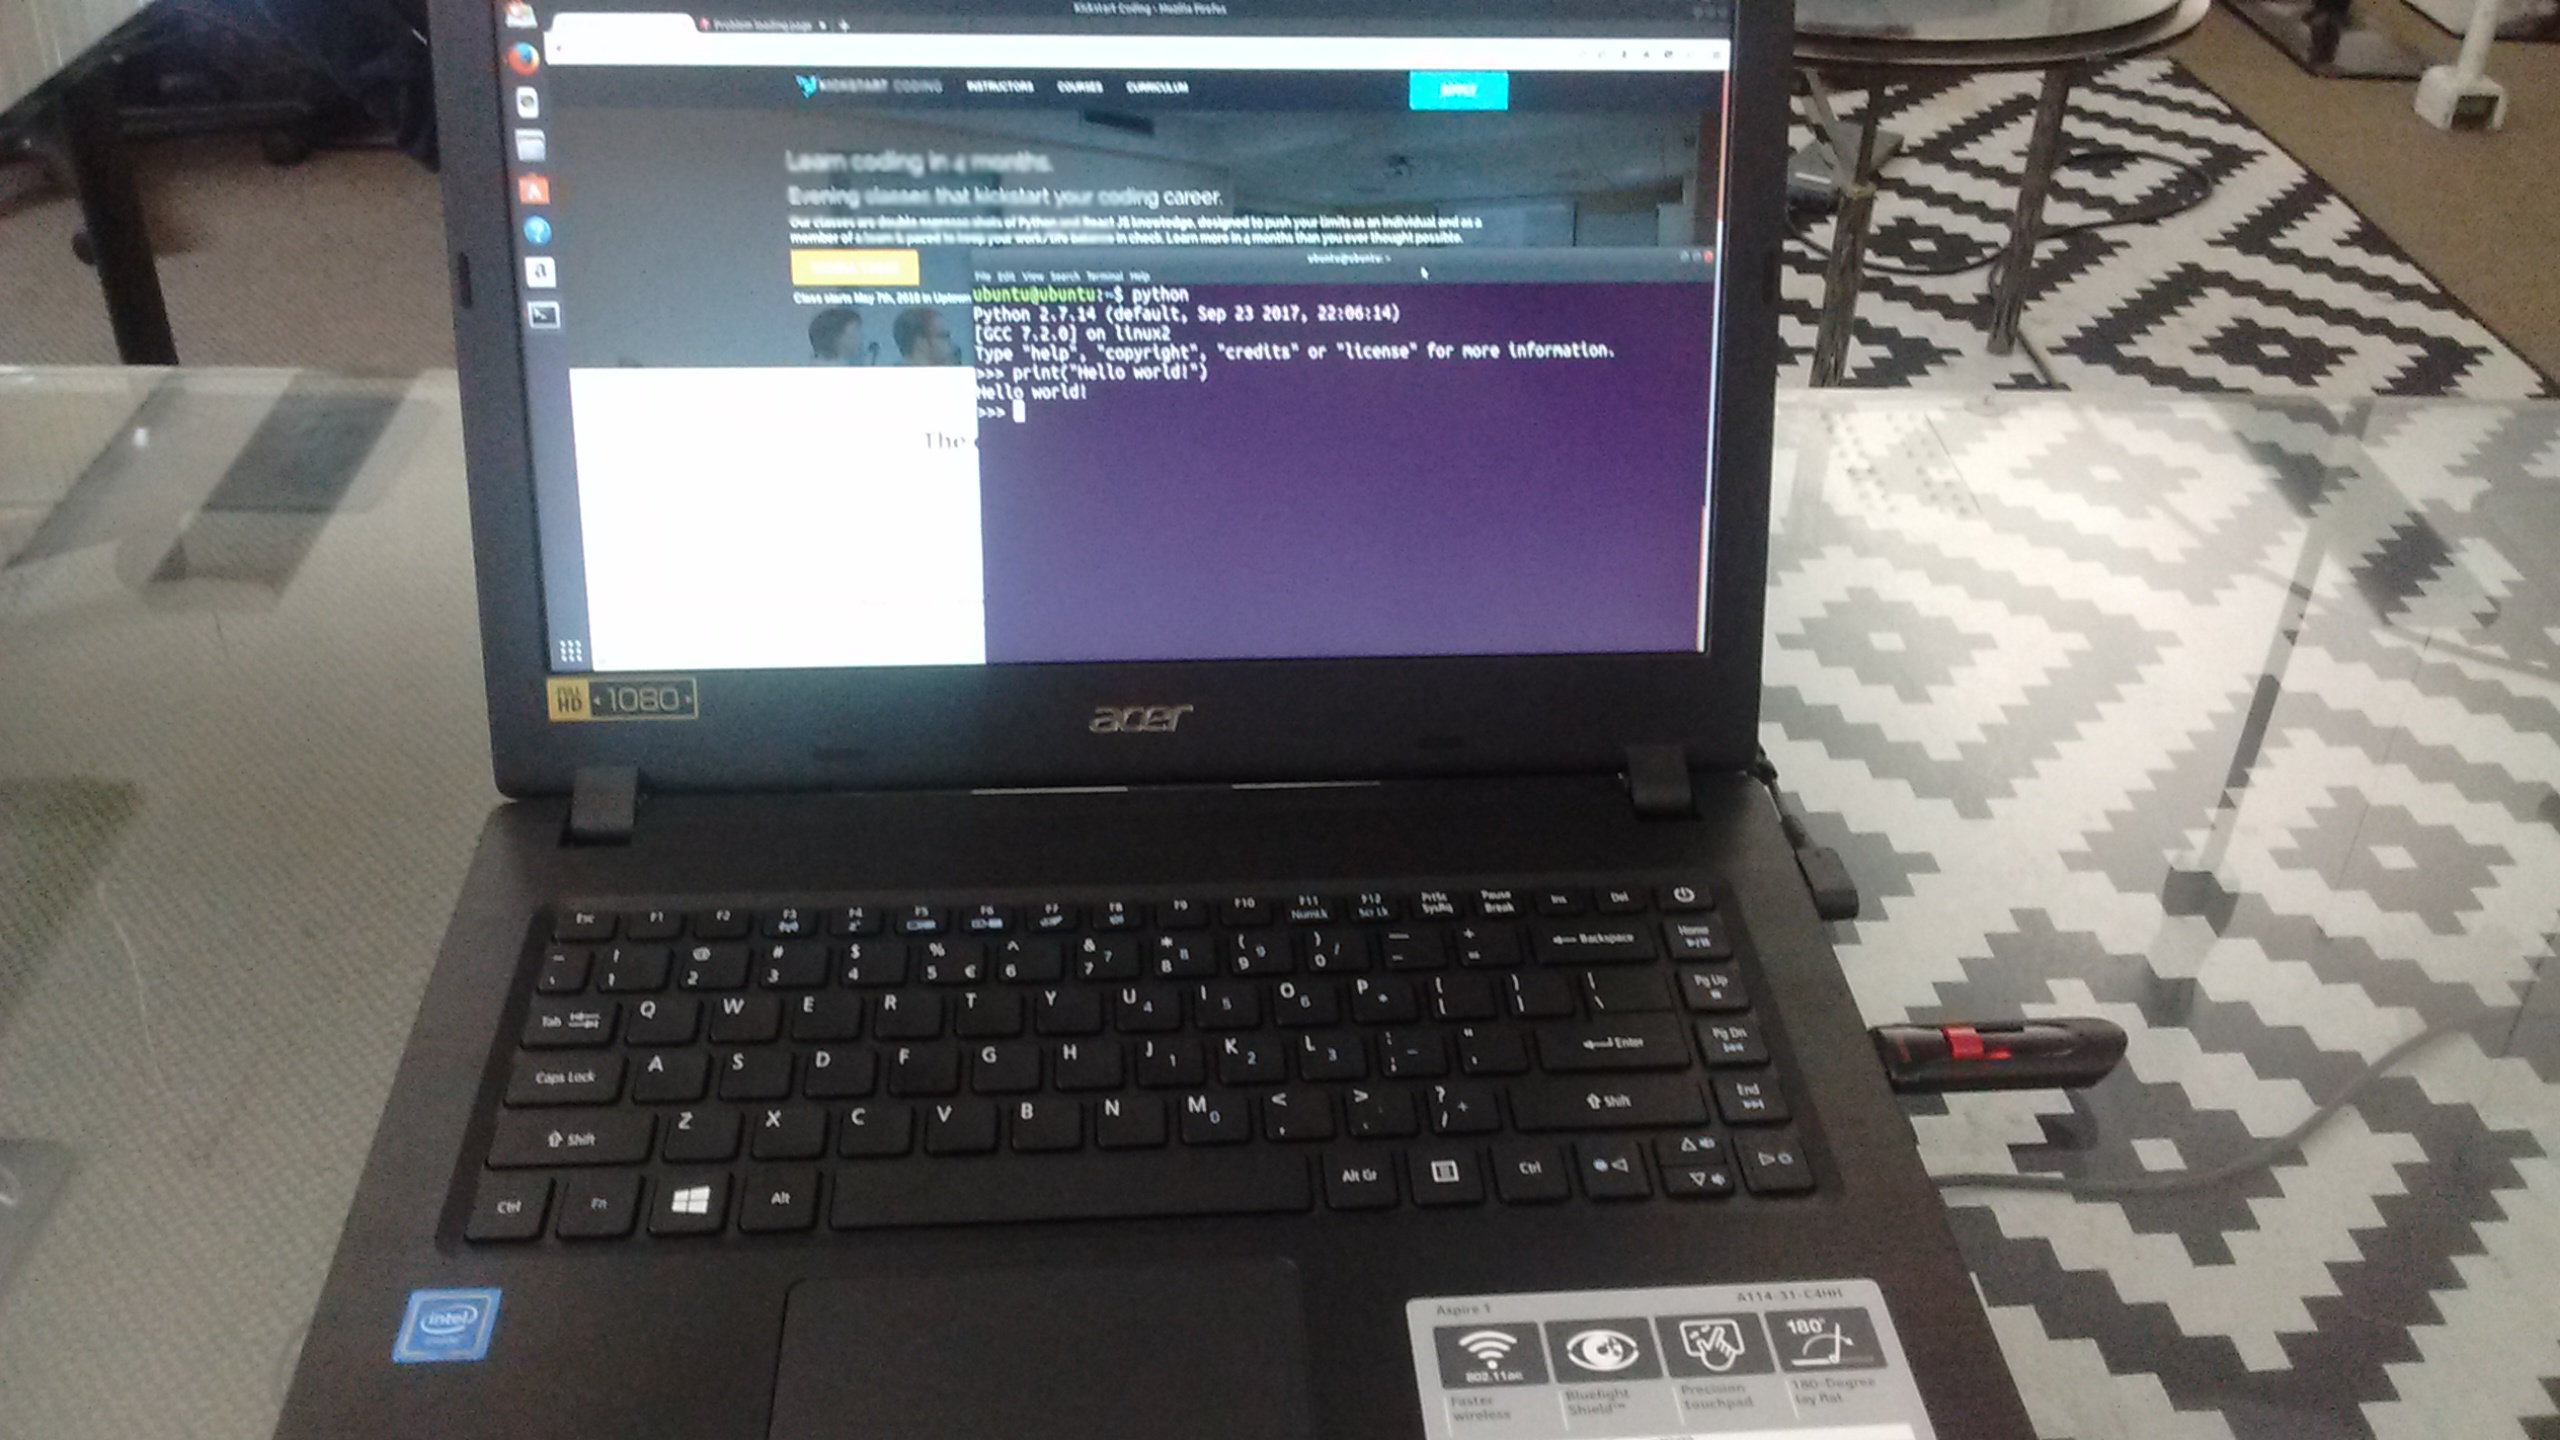 Linux running on my Acer Aspire 1